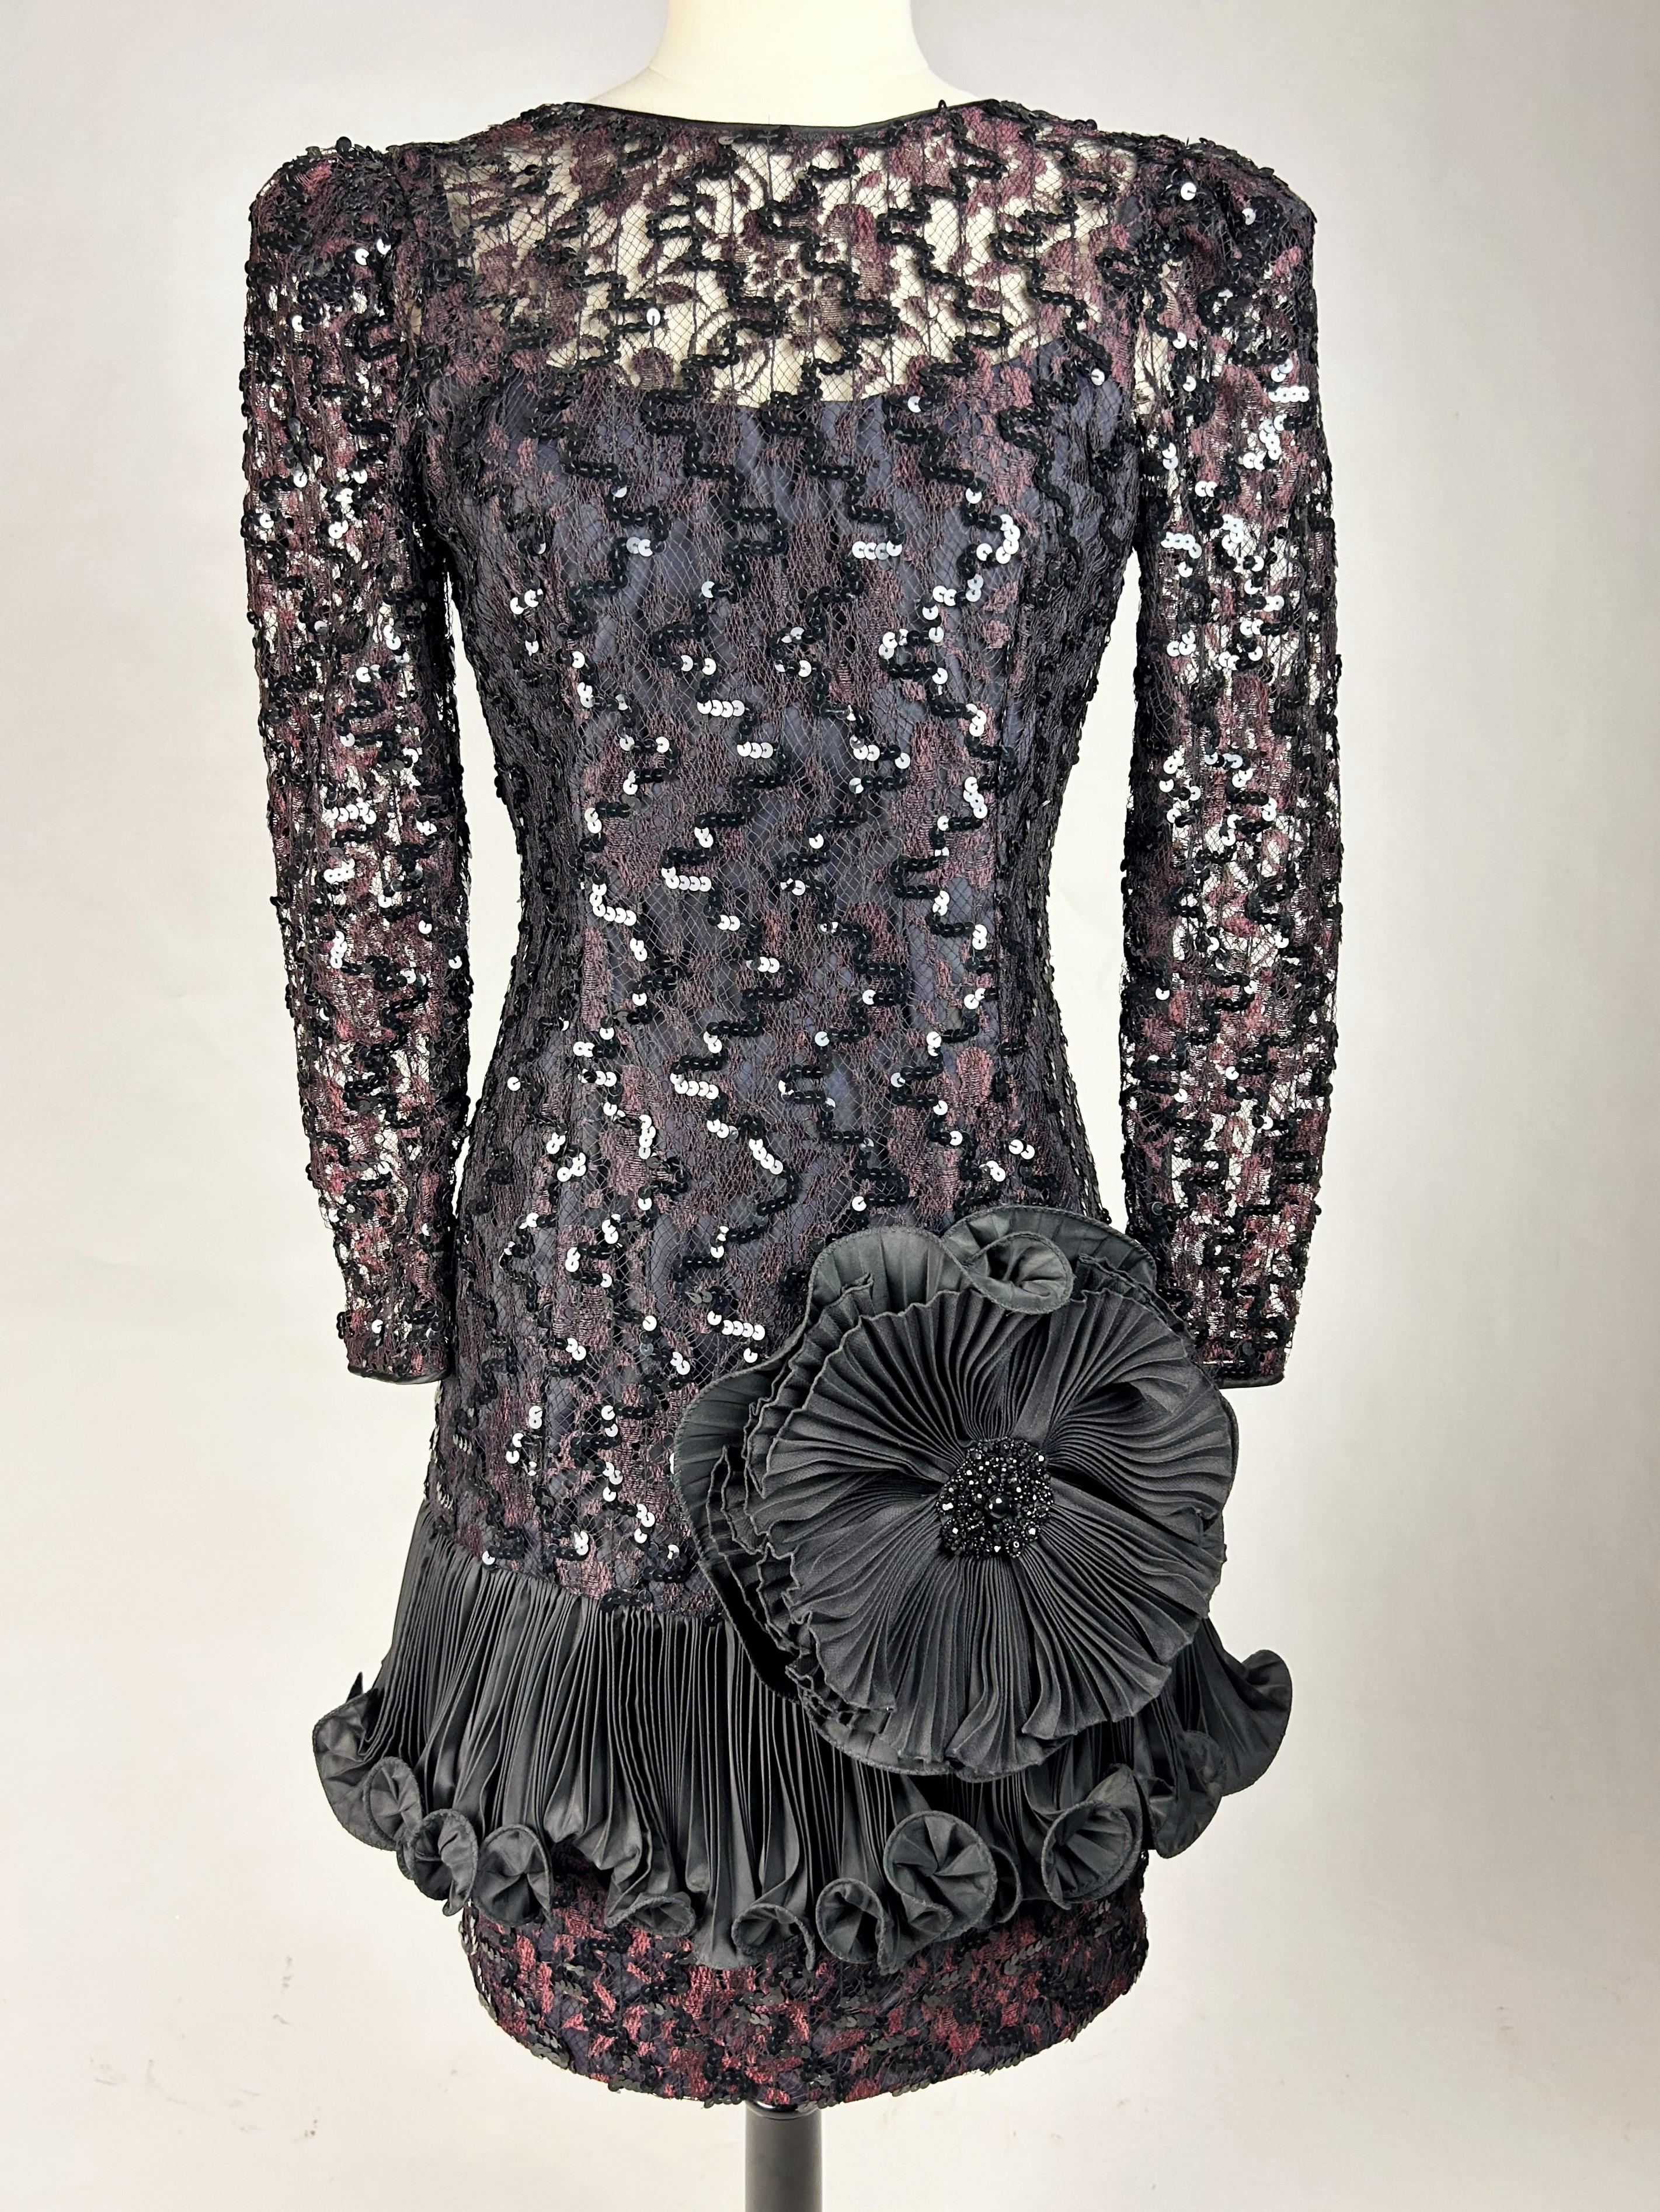 Circa 1985

France

Black and wine lace cocktail dress embroidered with sequins by Louis Féraud Haute couture dating from the 1980s.  Short, form-fitting sheath dress with long sleeves and plunging neckline in the back fastened with a zip. Large